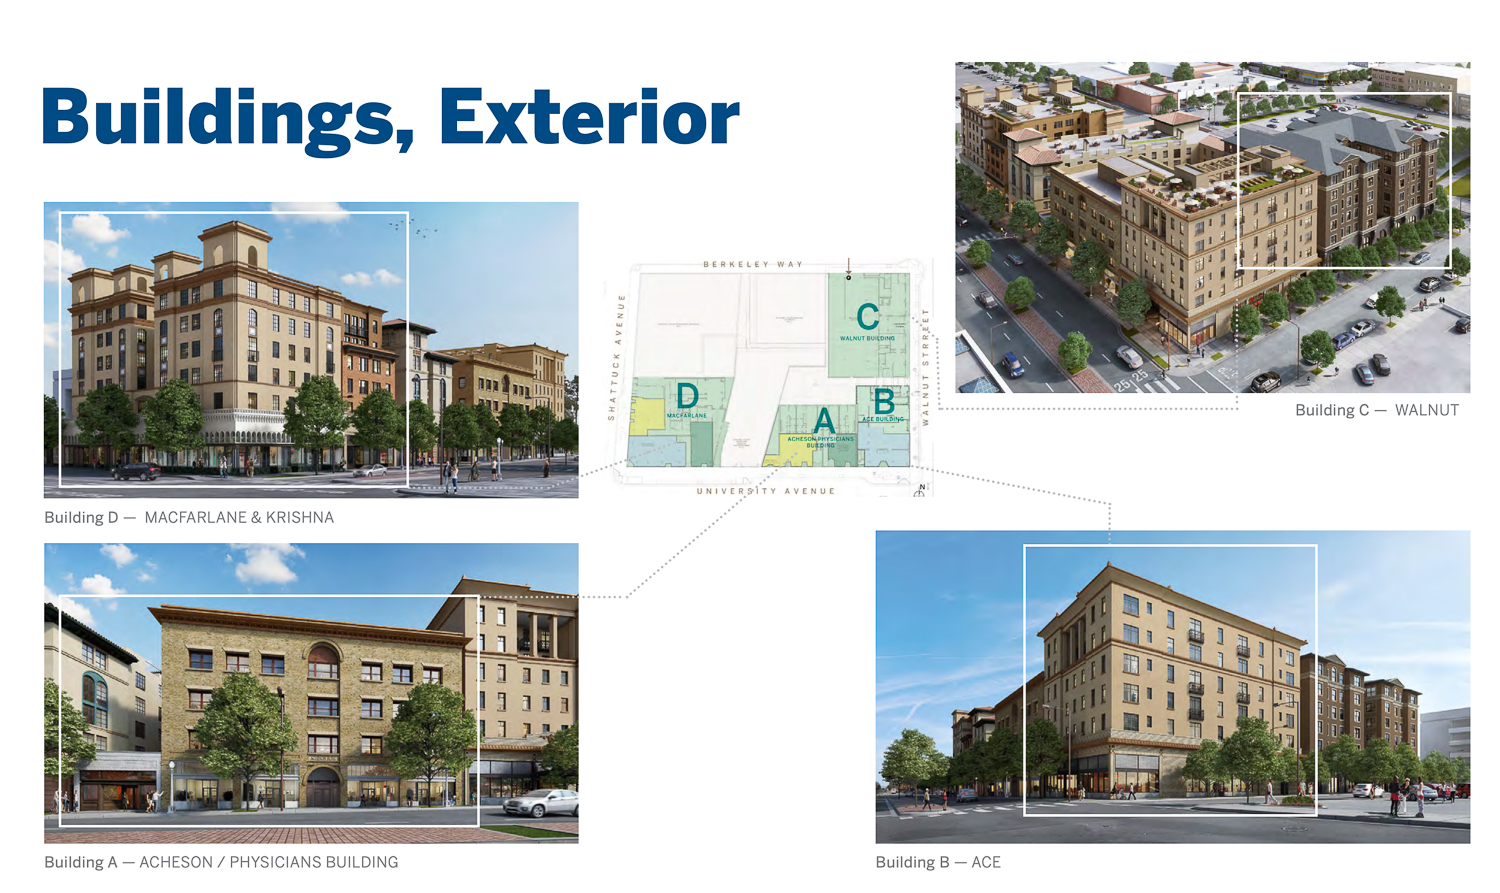 Modera Acheson Commons building exteriors, rendering by Sky Design